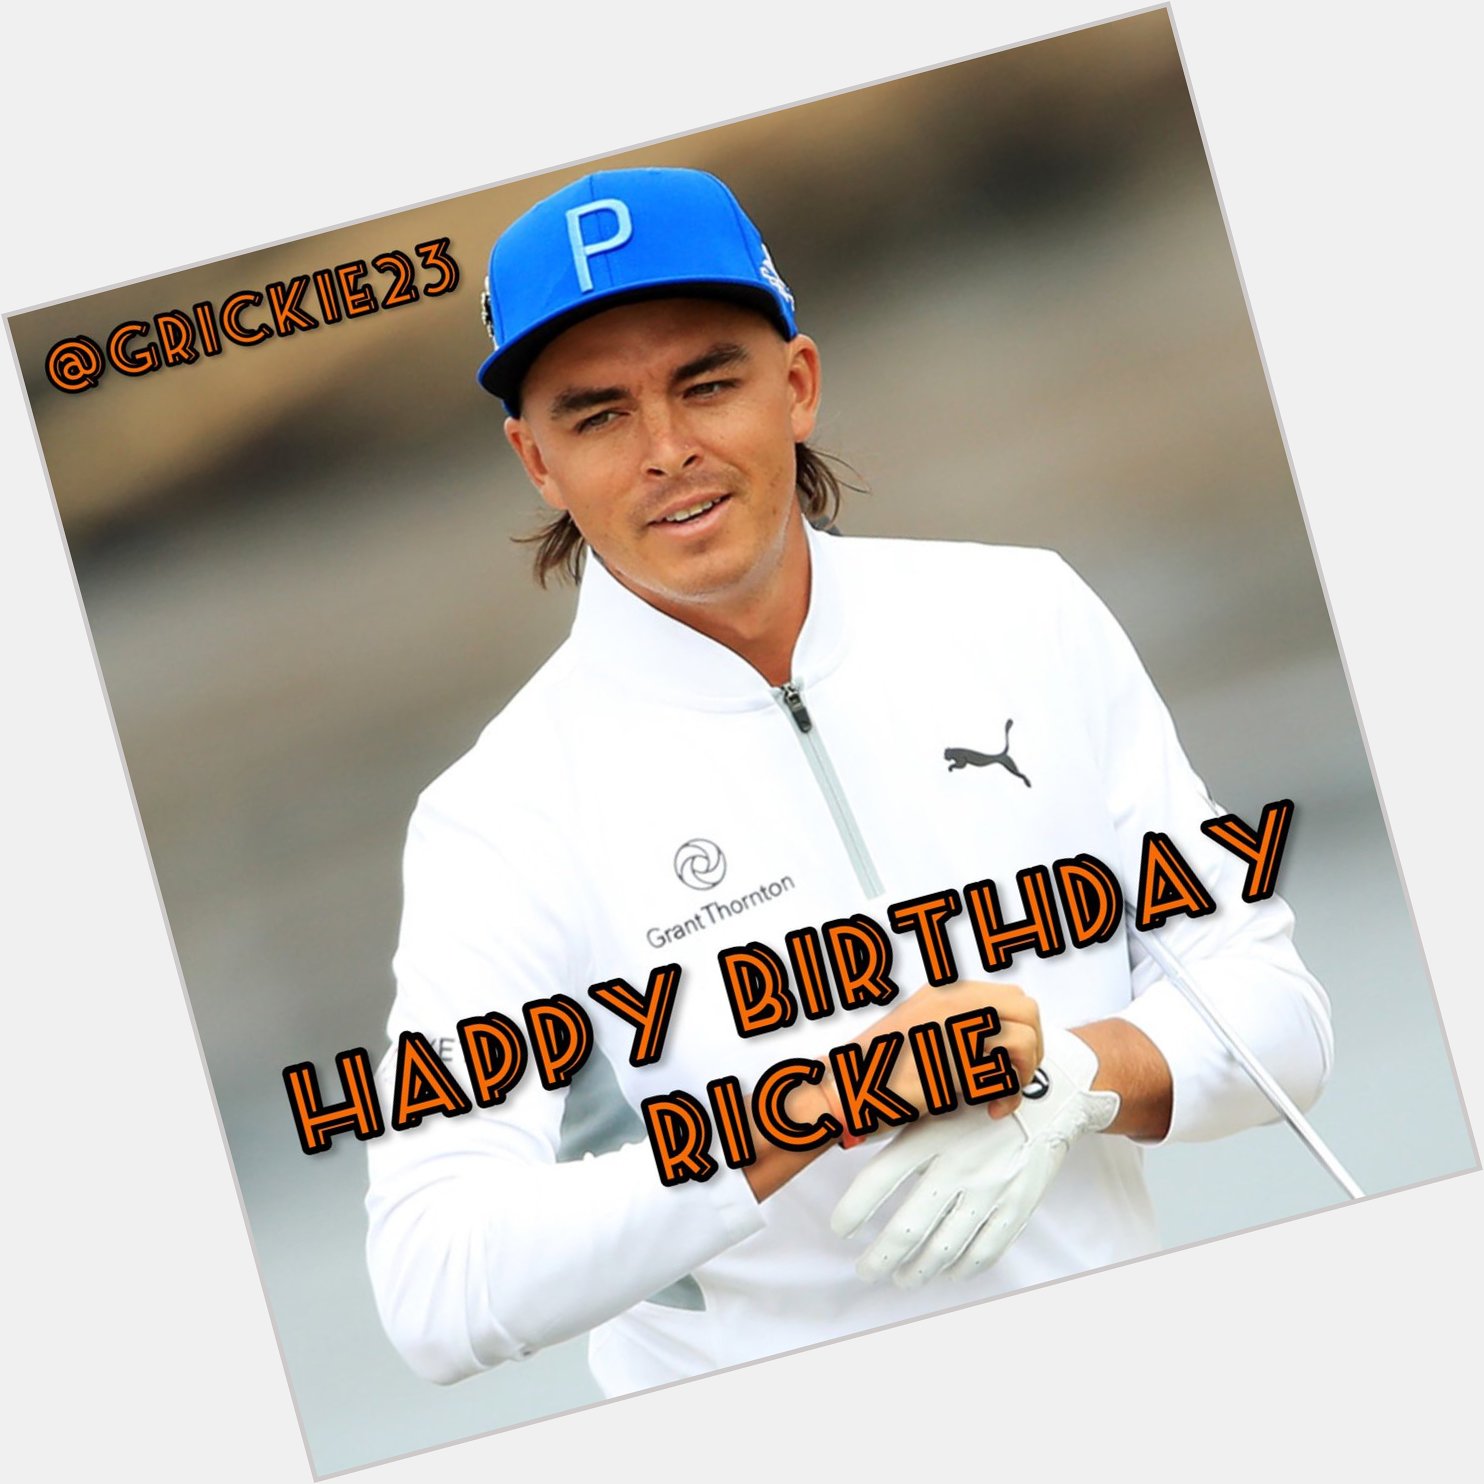 It s the 13th of December and Rickie Fowler is 34! 

Happy Birthday  | 